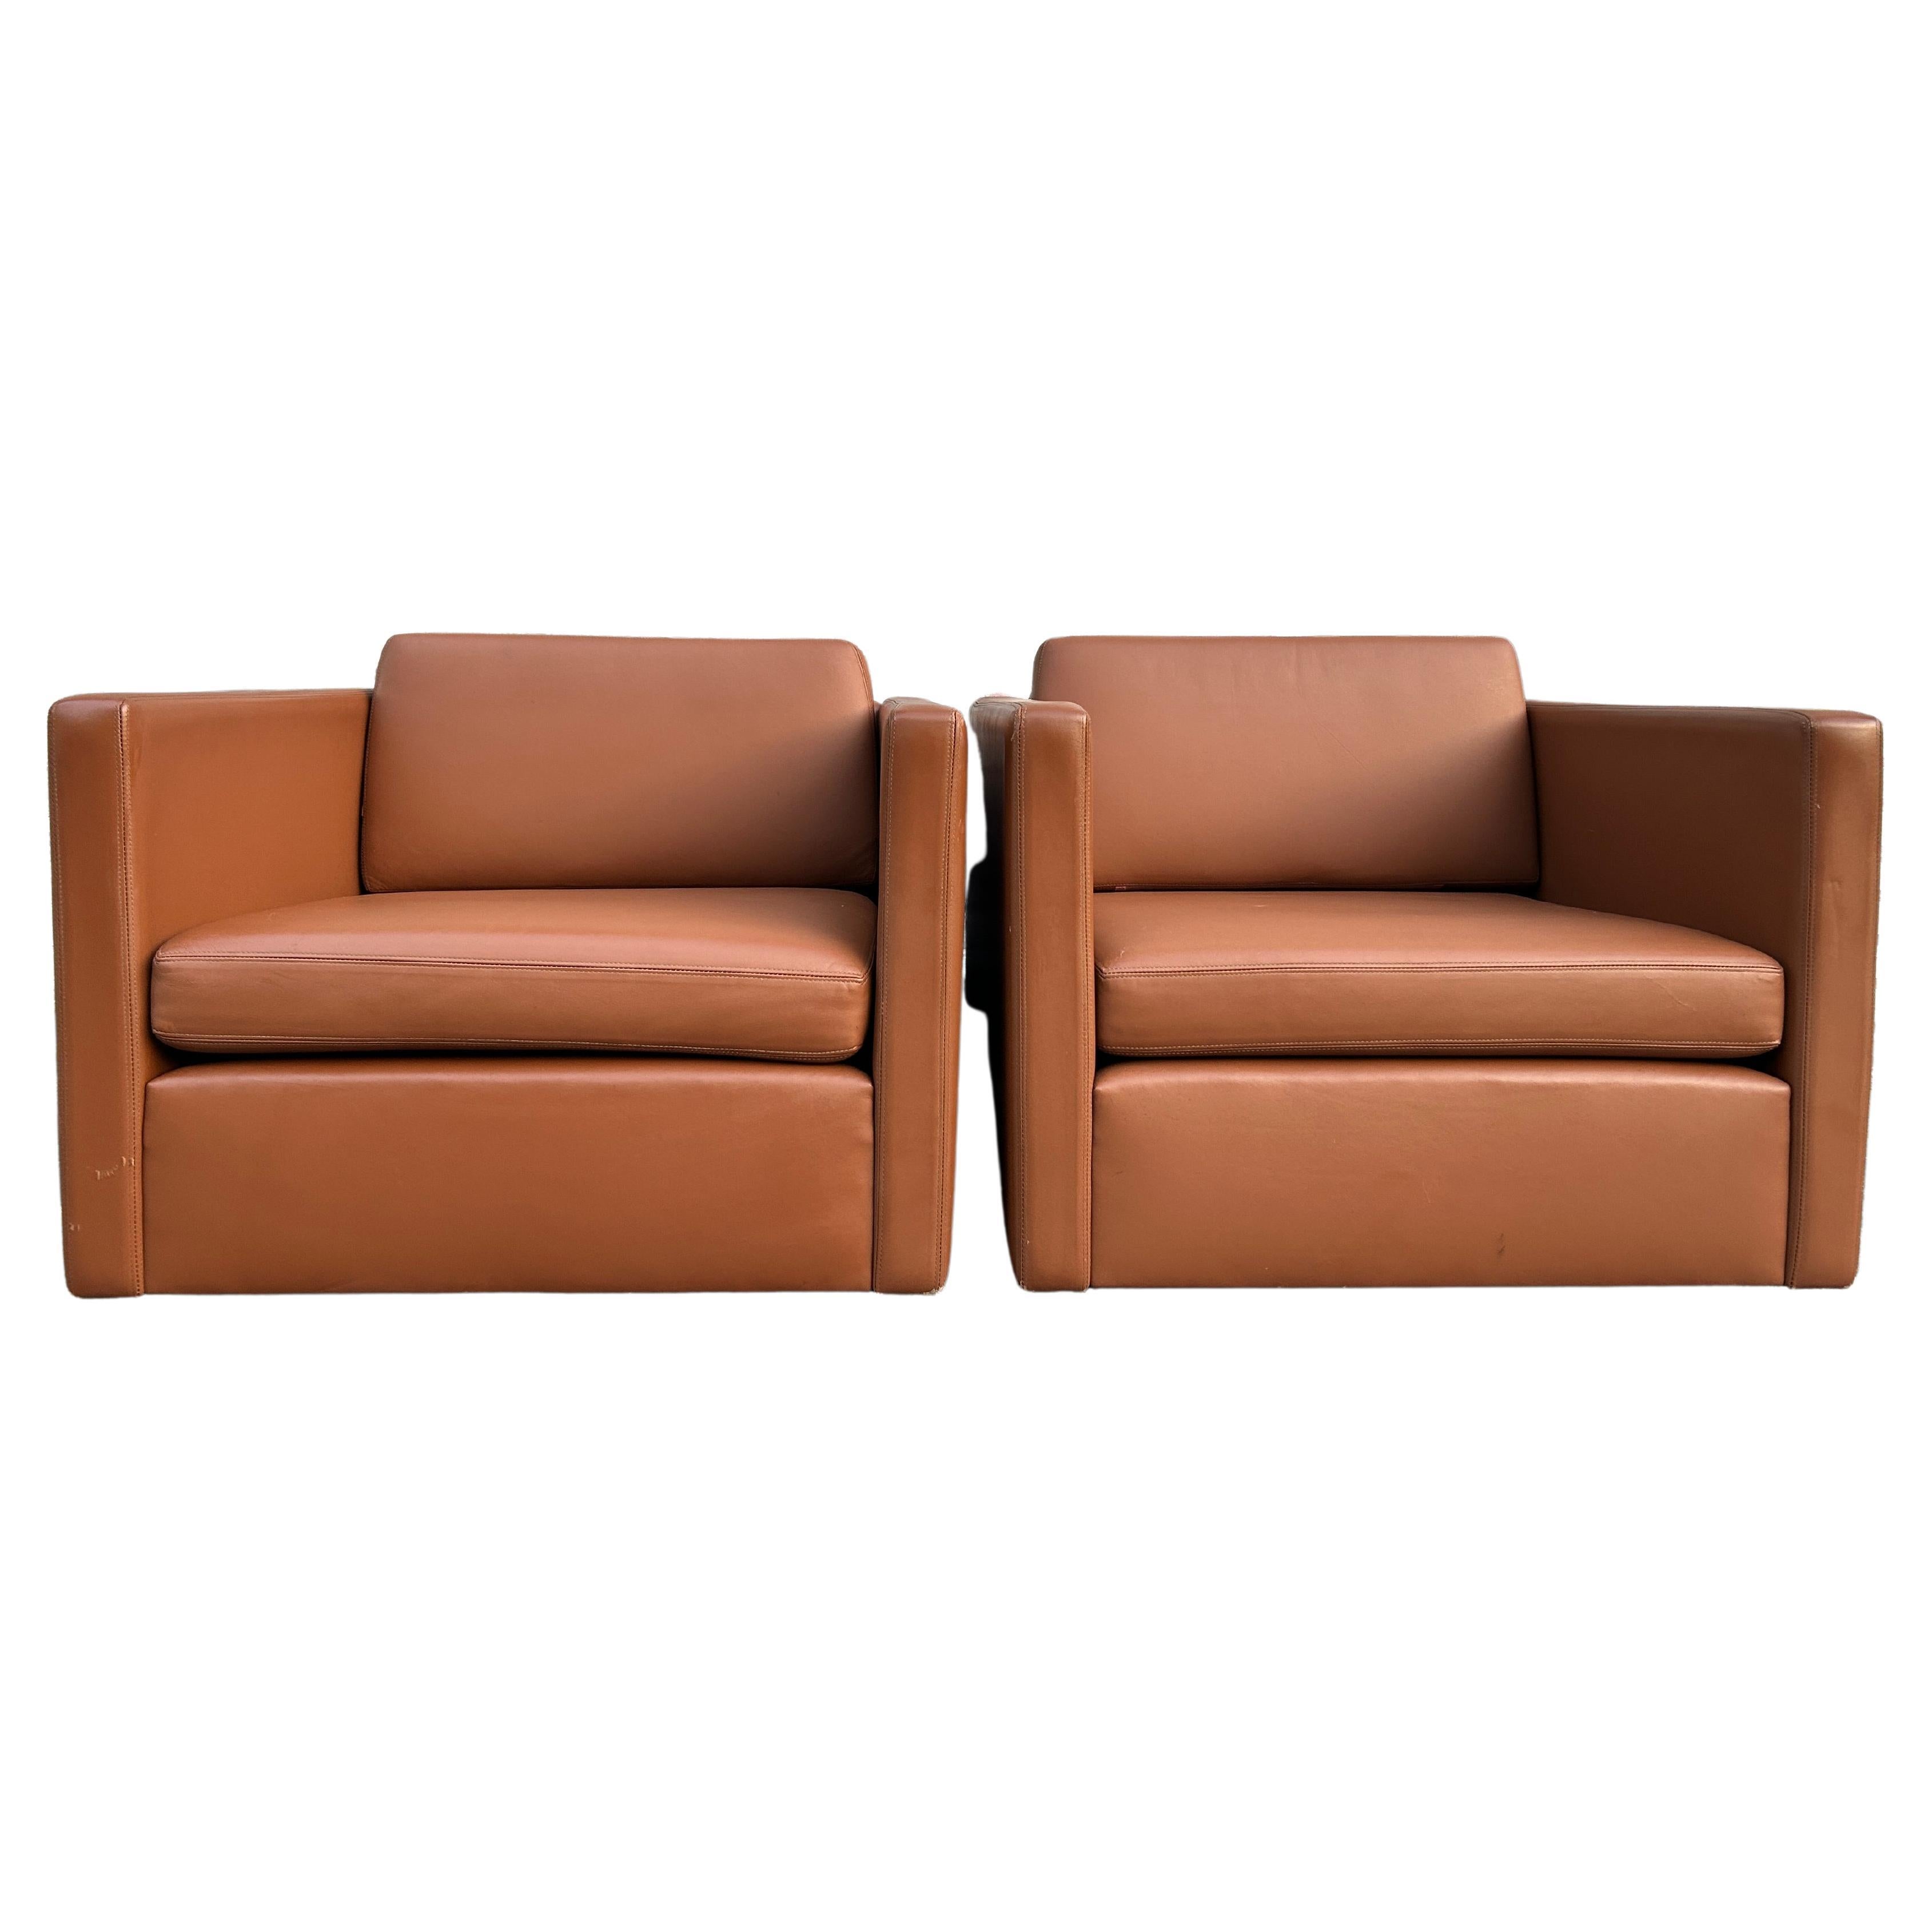 Superb Mid-Century Modern Pfister Cube Lounge Chairs by Knoll in Cognac Leather For Sale